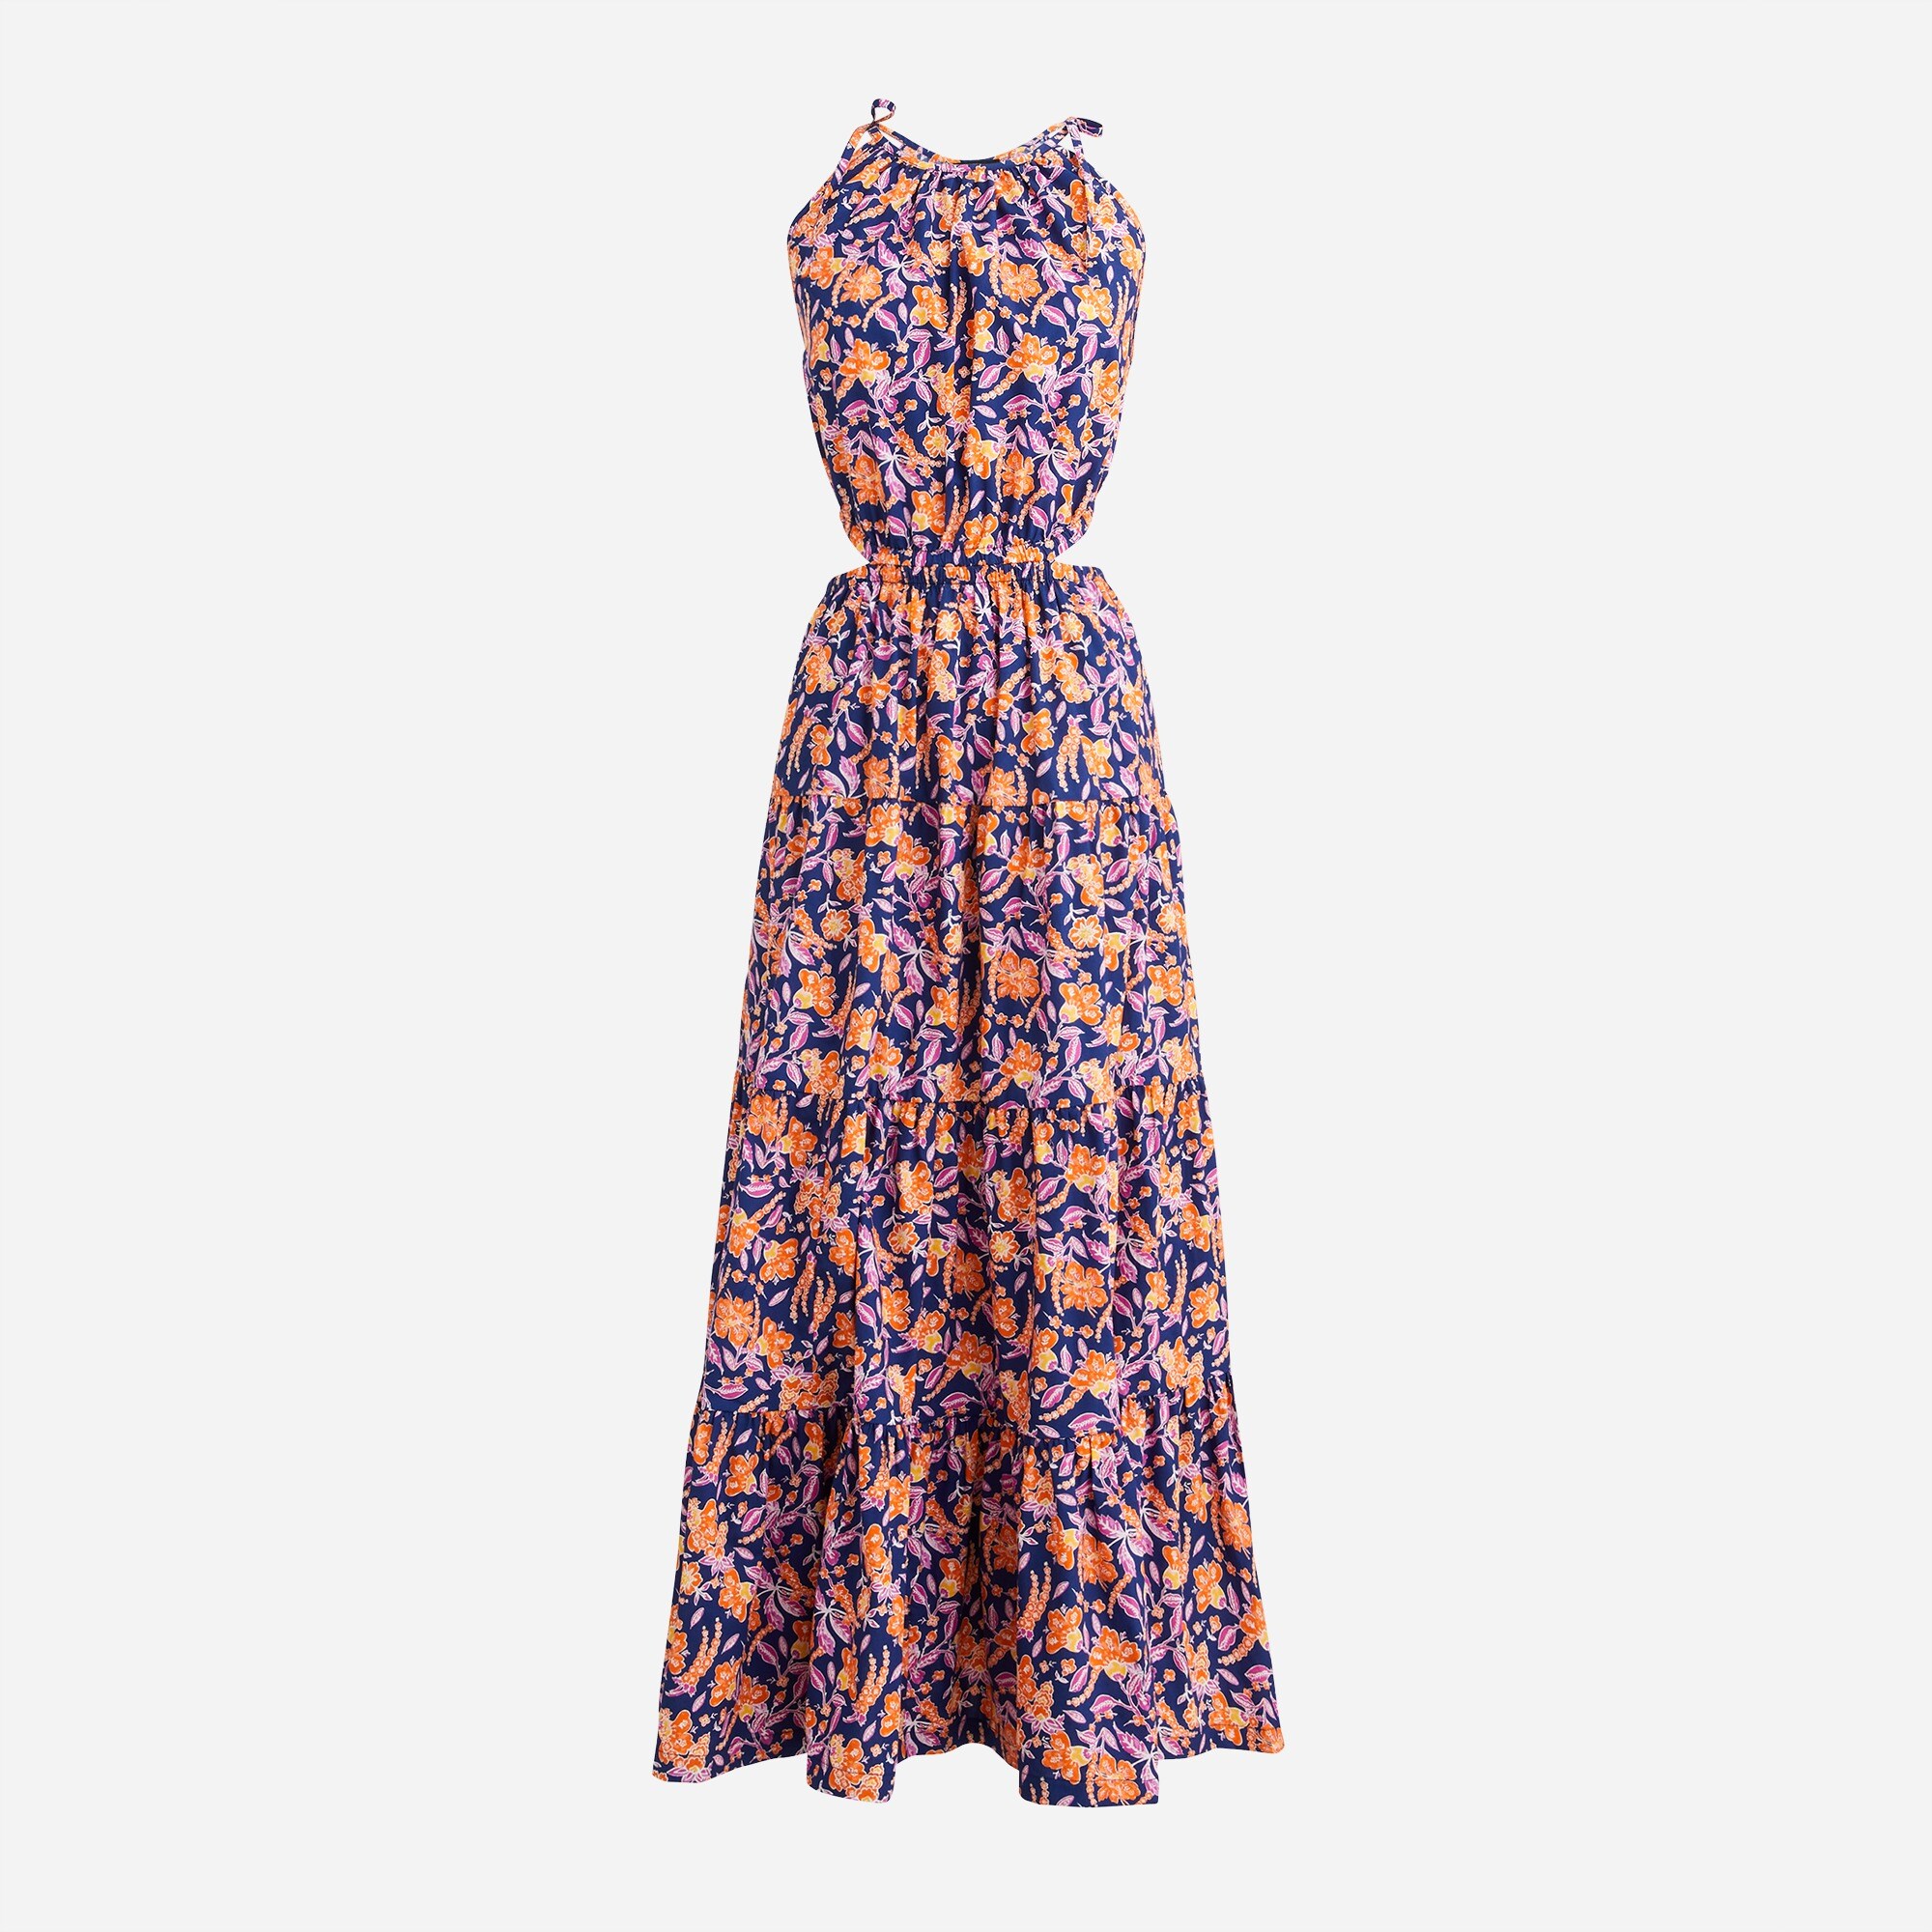 J.Crew: Harbor Side-cutout Dress In Painted Block Print For Women